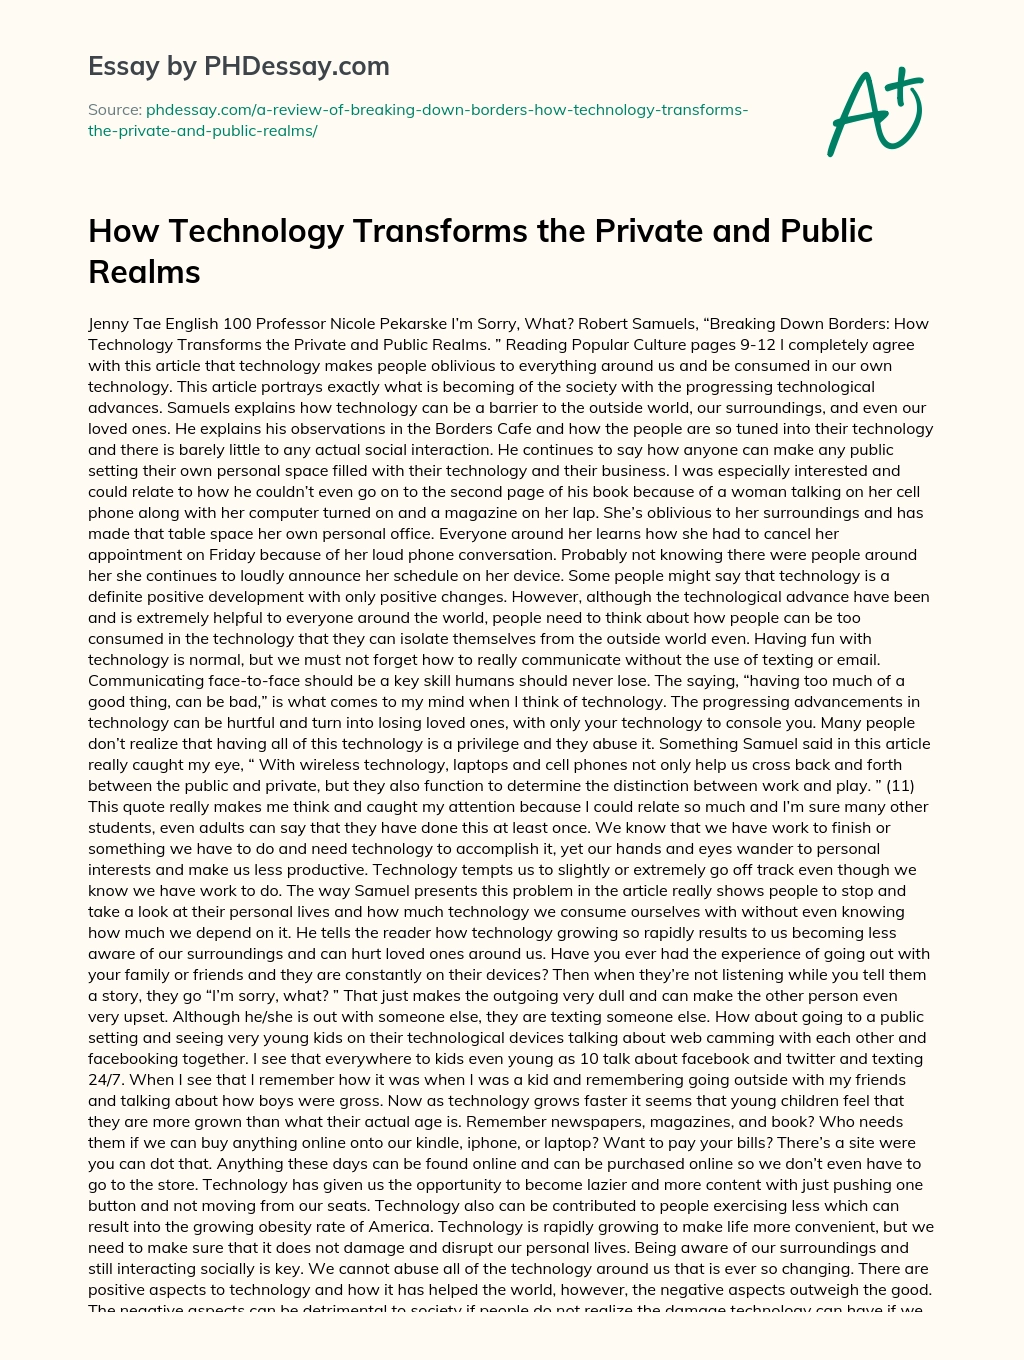 How Technology Transforms the Private and Public Realms essay